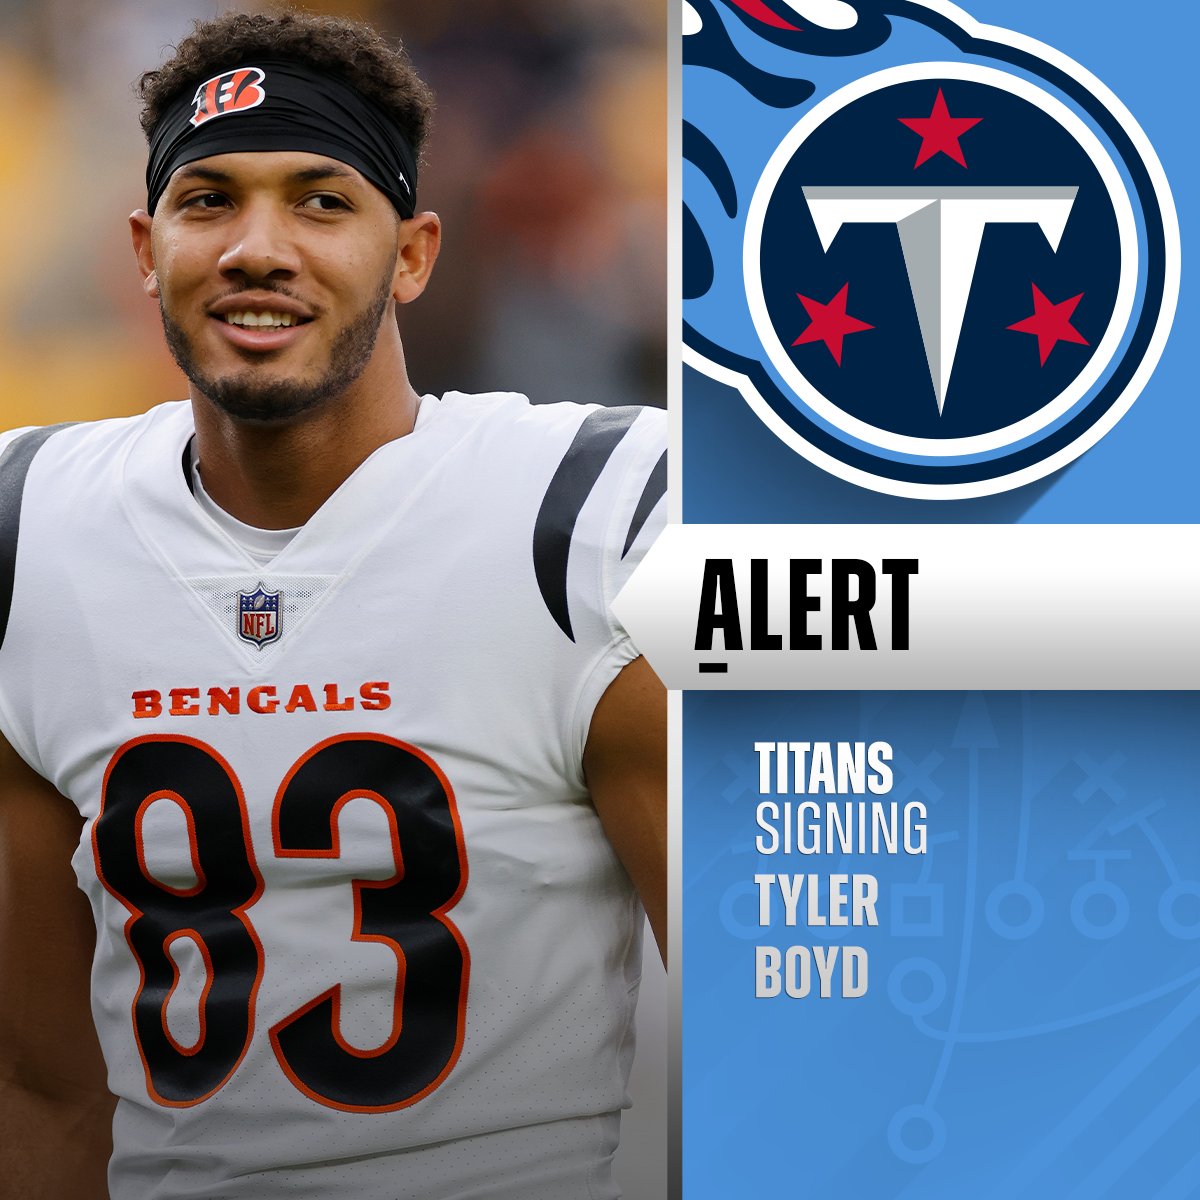 WR Tyler Boyd signing with the Titans on a 1-year deal worth up to $4.5M. (via @rapsheet)